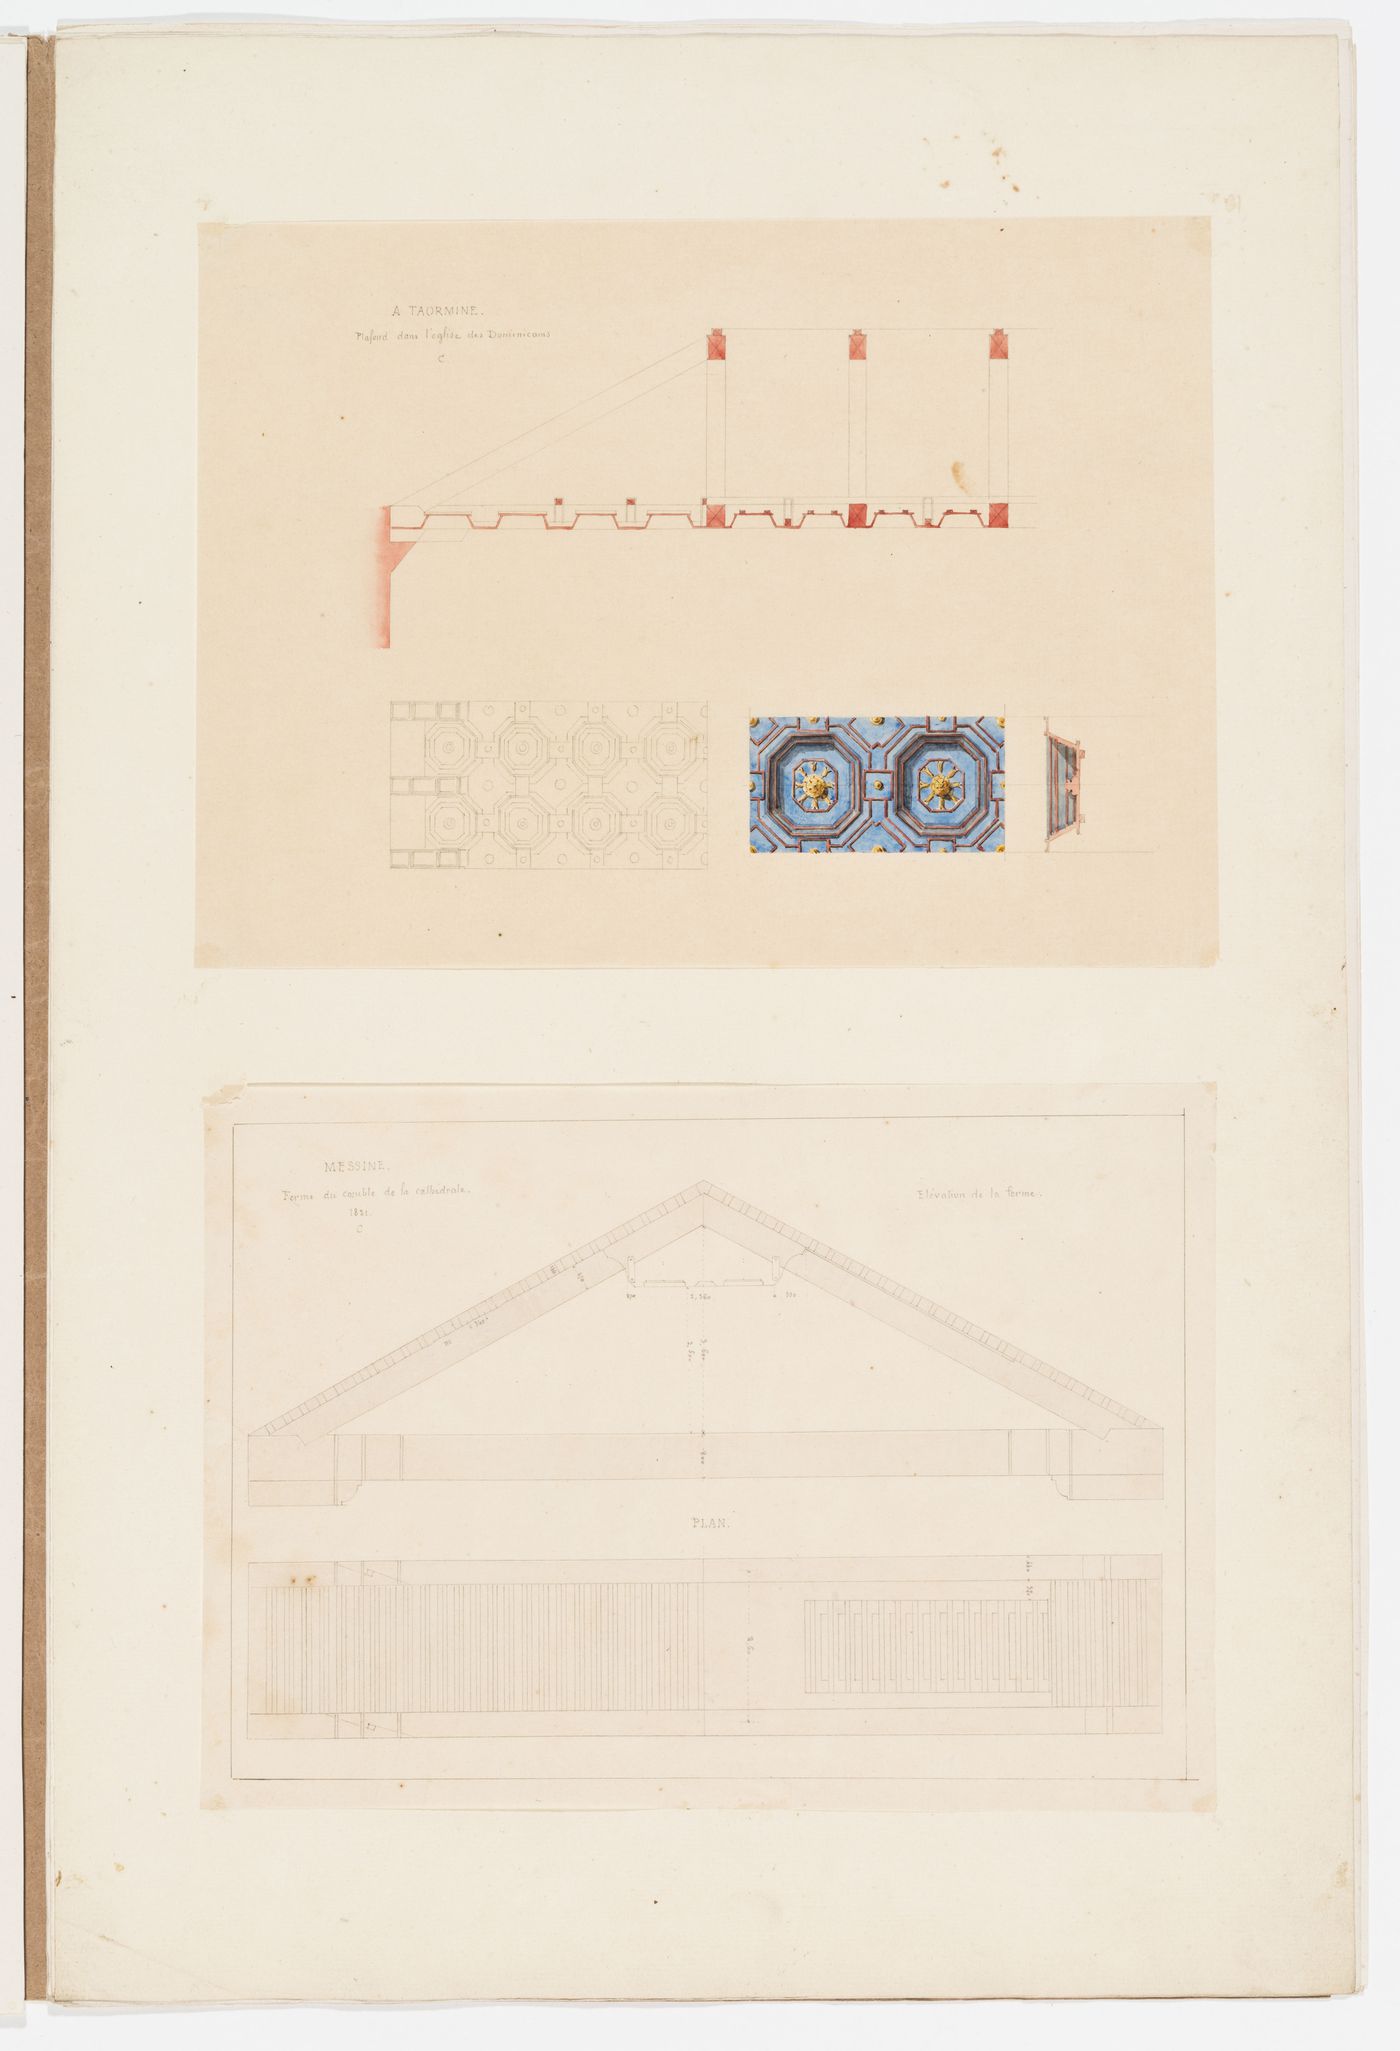 Section, reflected ceiling plan, and details of the ceiling coffers in the Church of San Dominico, Taormina; Elevation and reflected ceiling plan of the roof trusses of the Cathedral of San Maria, Messina